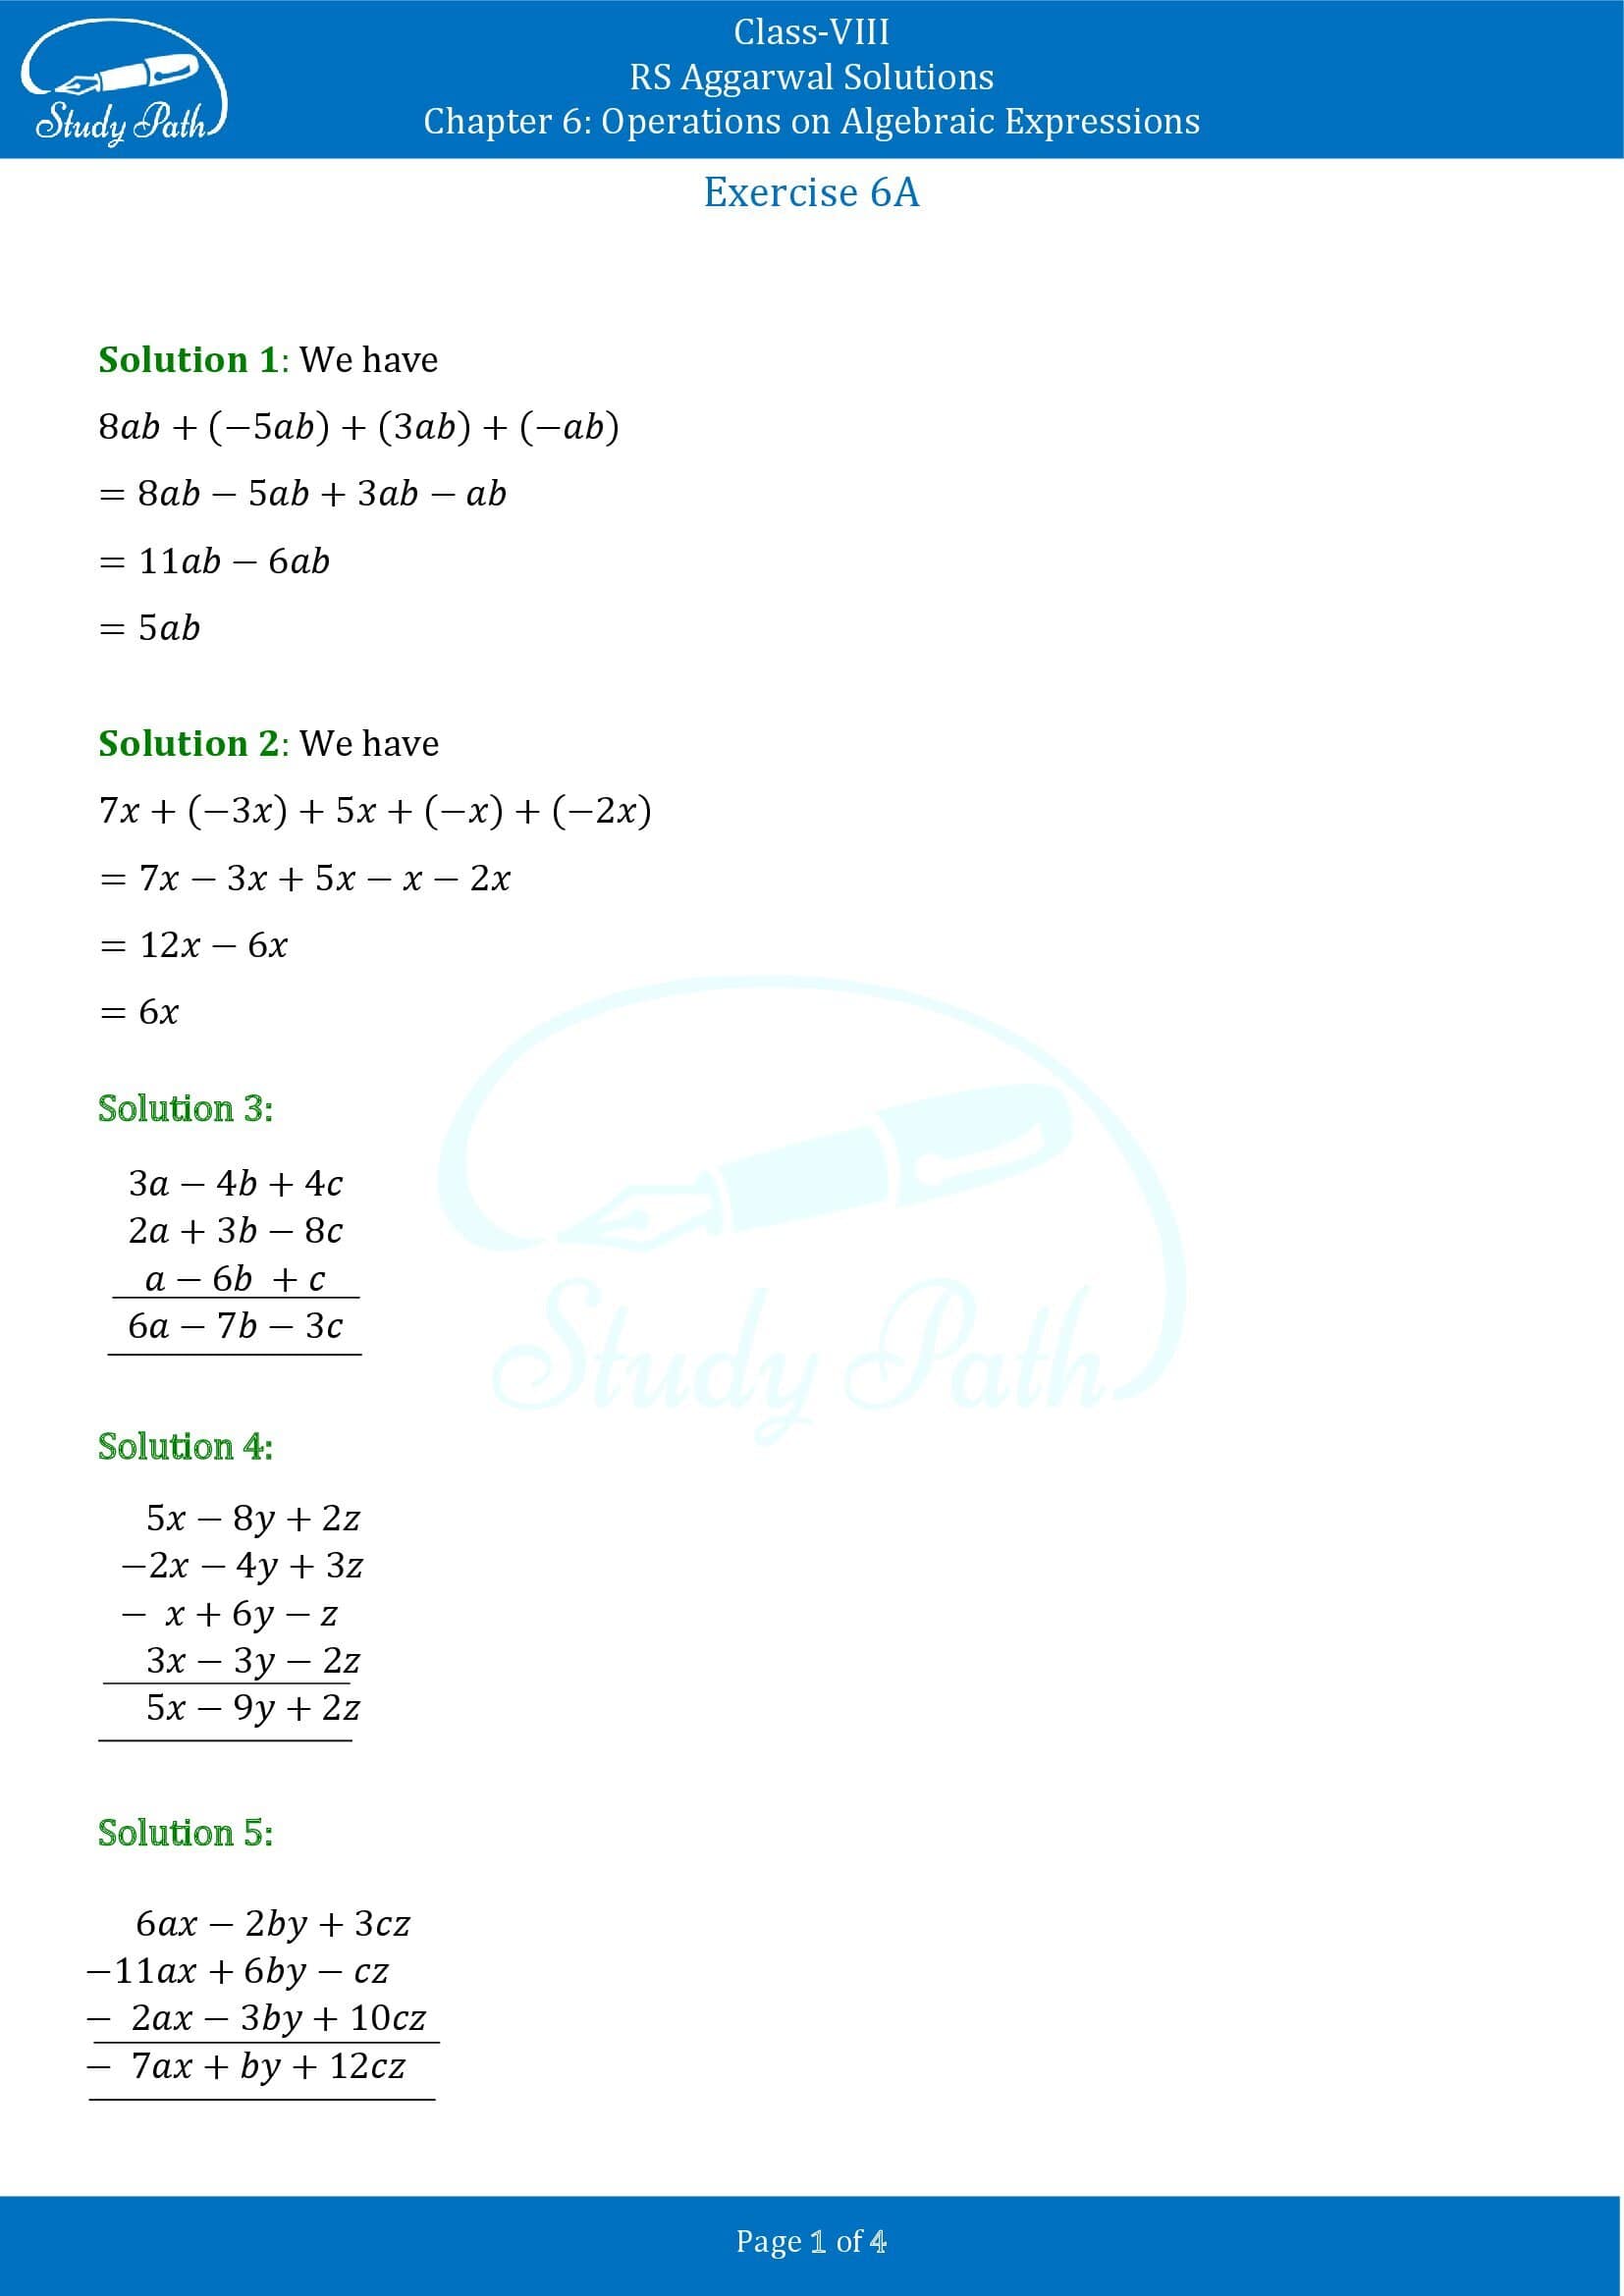 RS Aggarwal Solutions Class 8 Chapter 6 Operations on Algebraic Expressions Exercise 6A 001